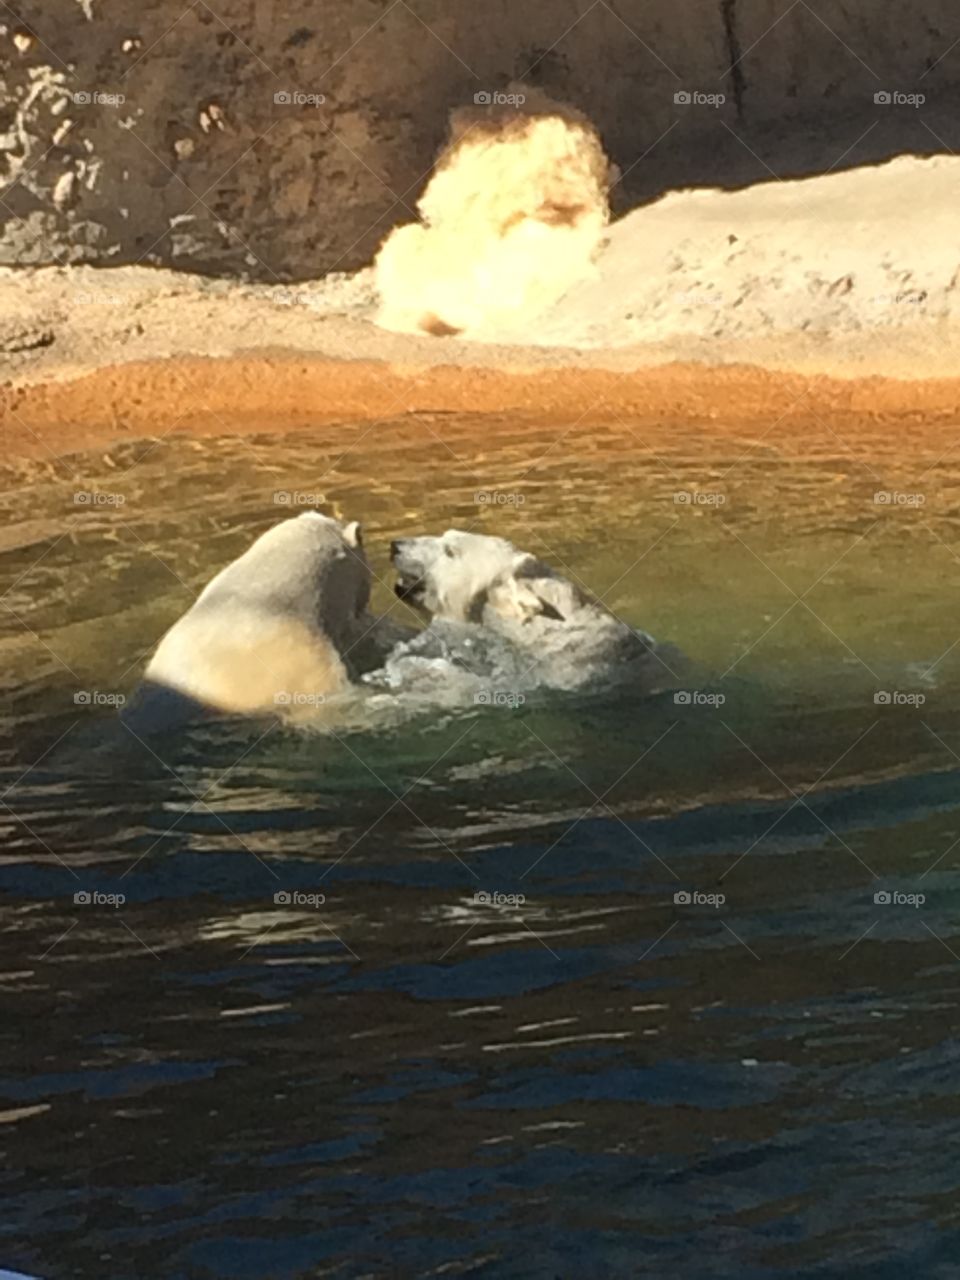 These to polar bears are polar opposites and can bearly stand each other which has lead to an epic battle to see who has the koalaficatios for the pool leader in the Denver zoo.